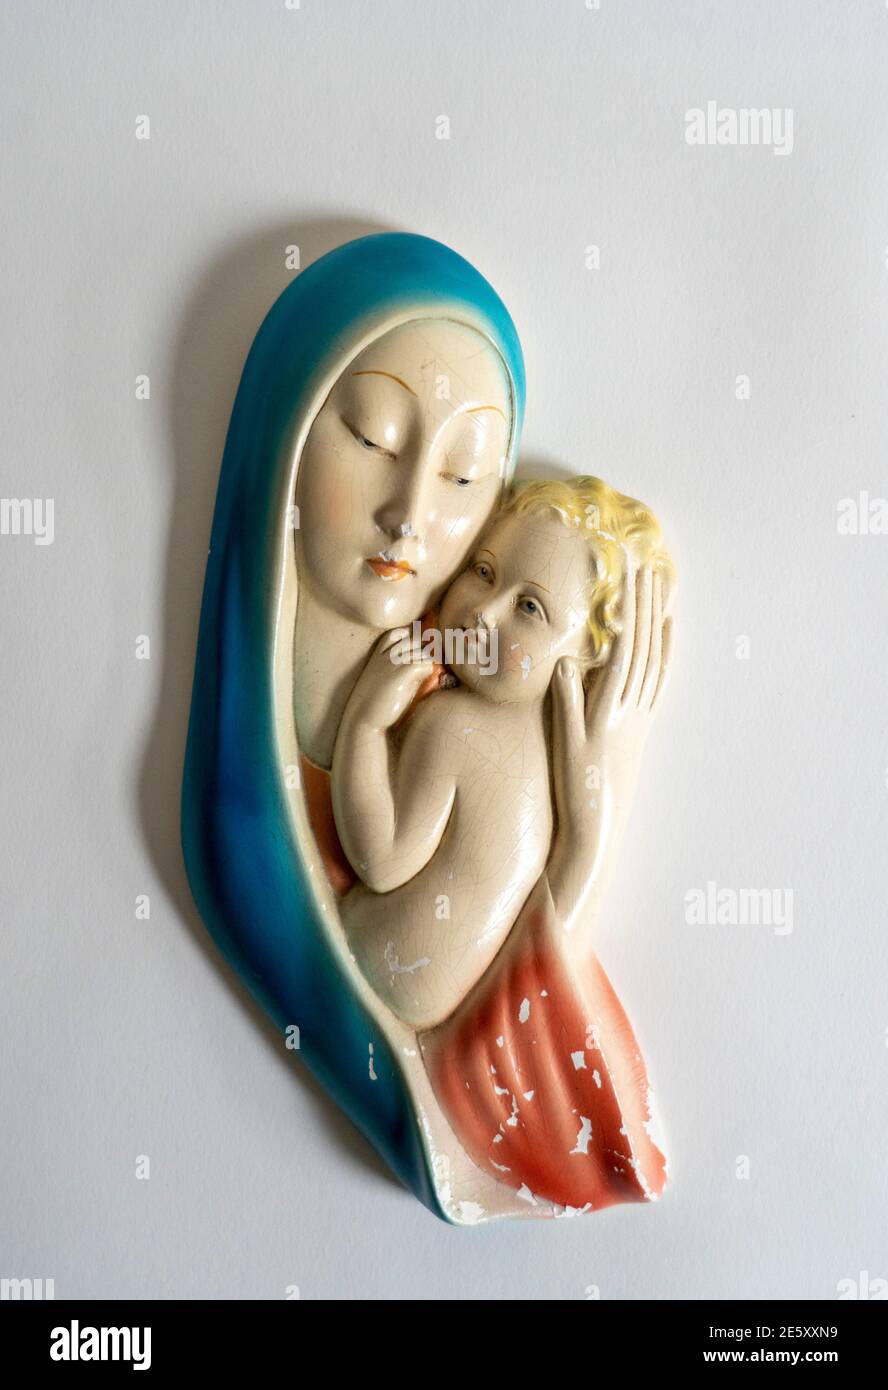 Antique Religious Iconographic statues and souv  enirs Stock Photo